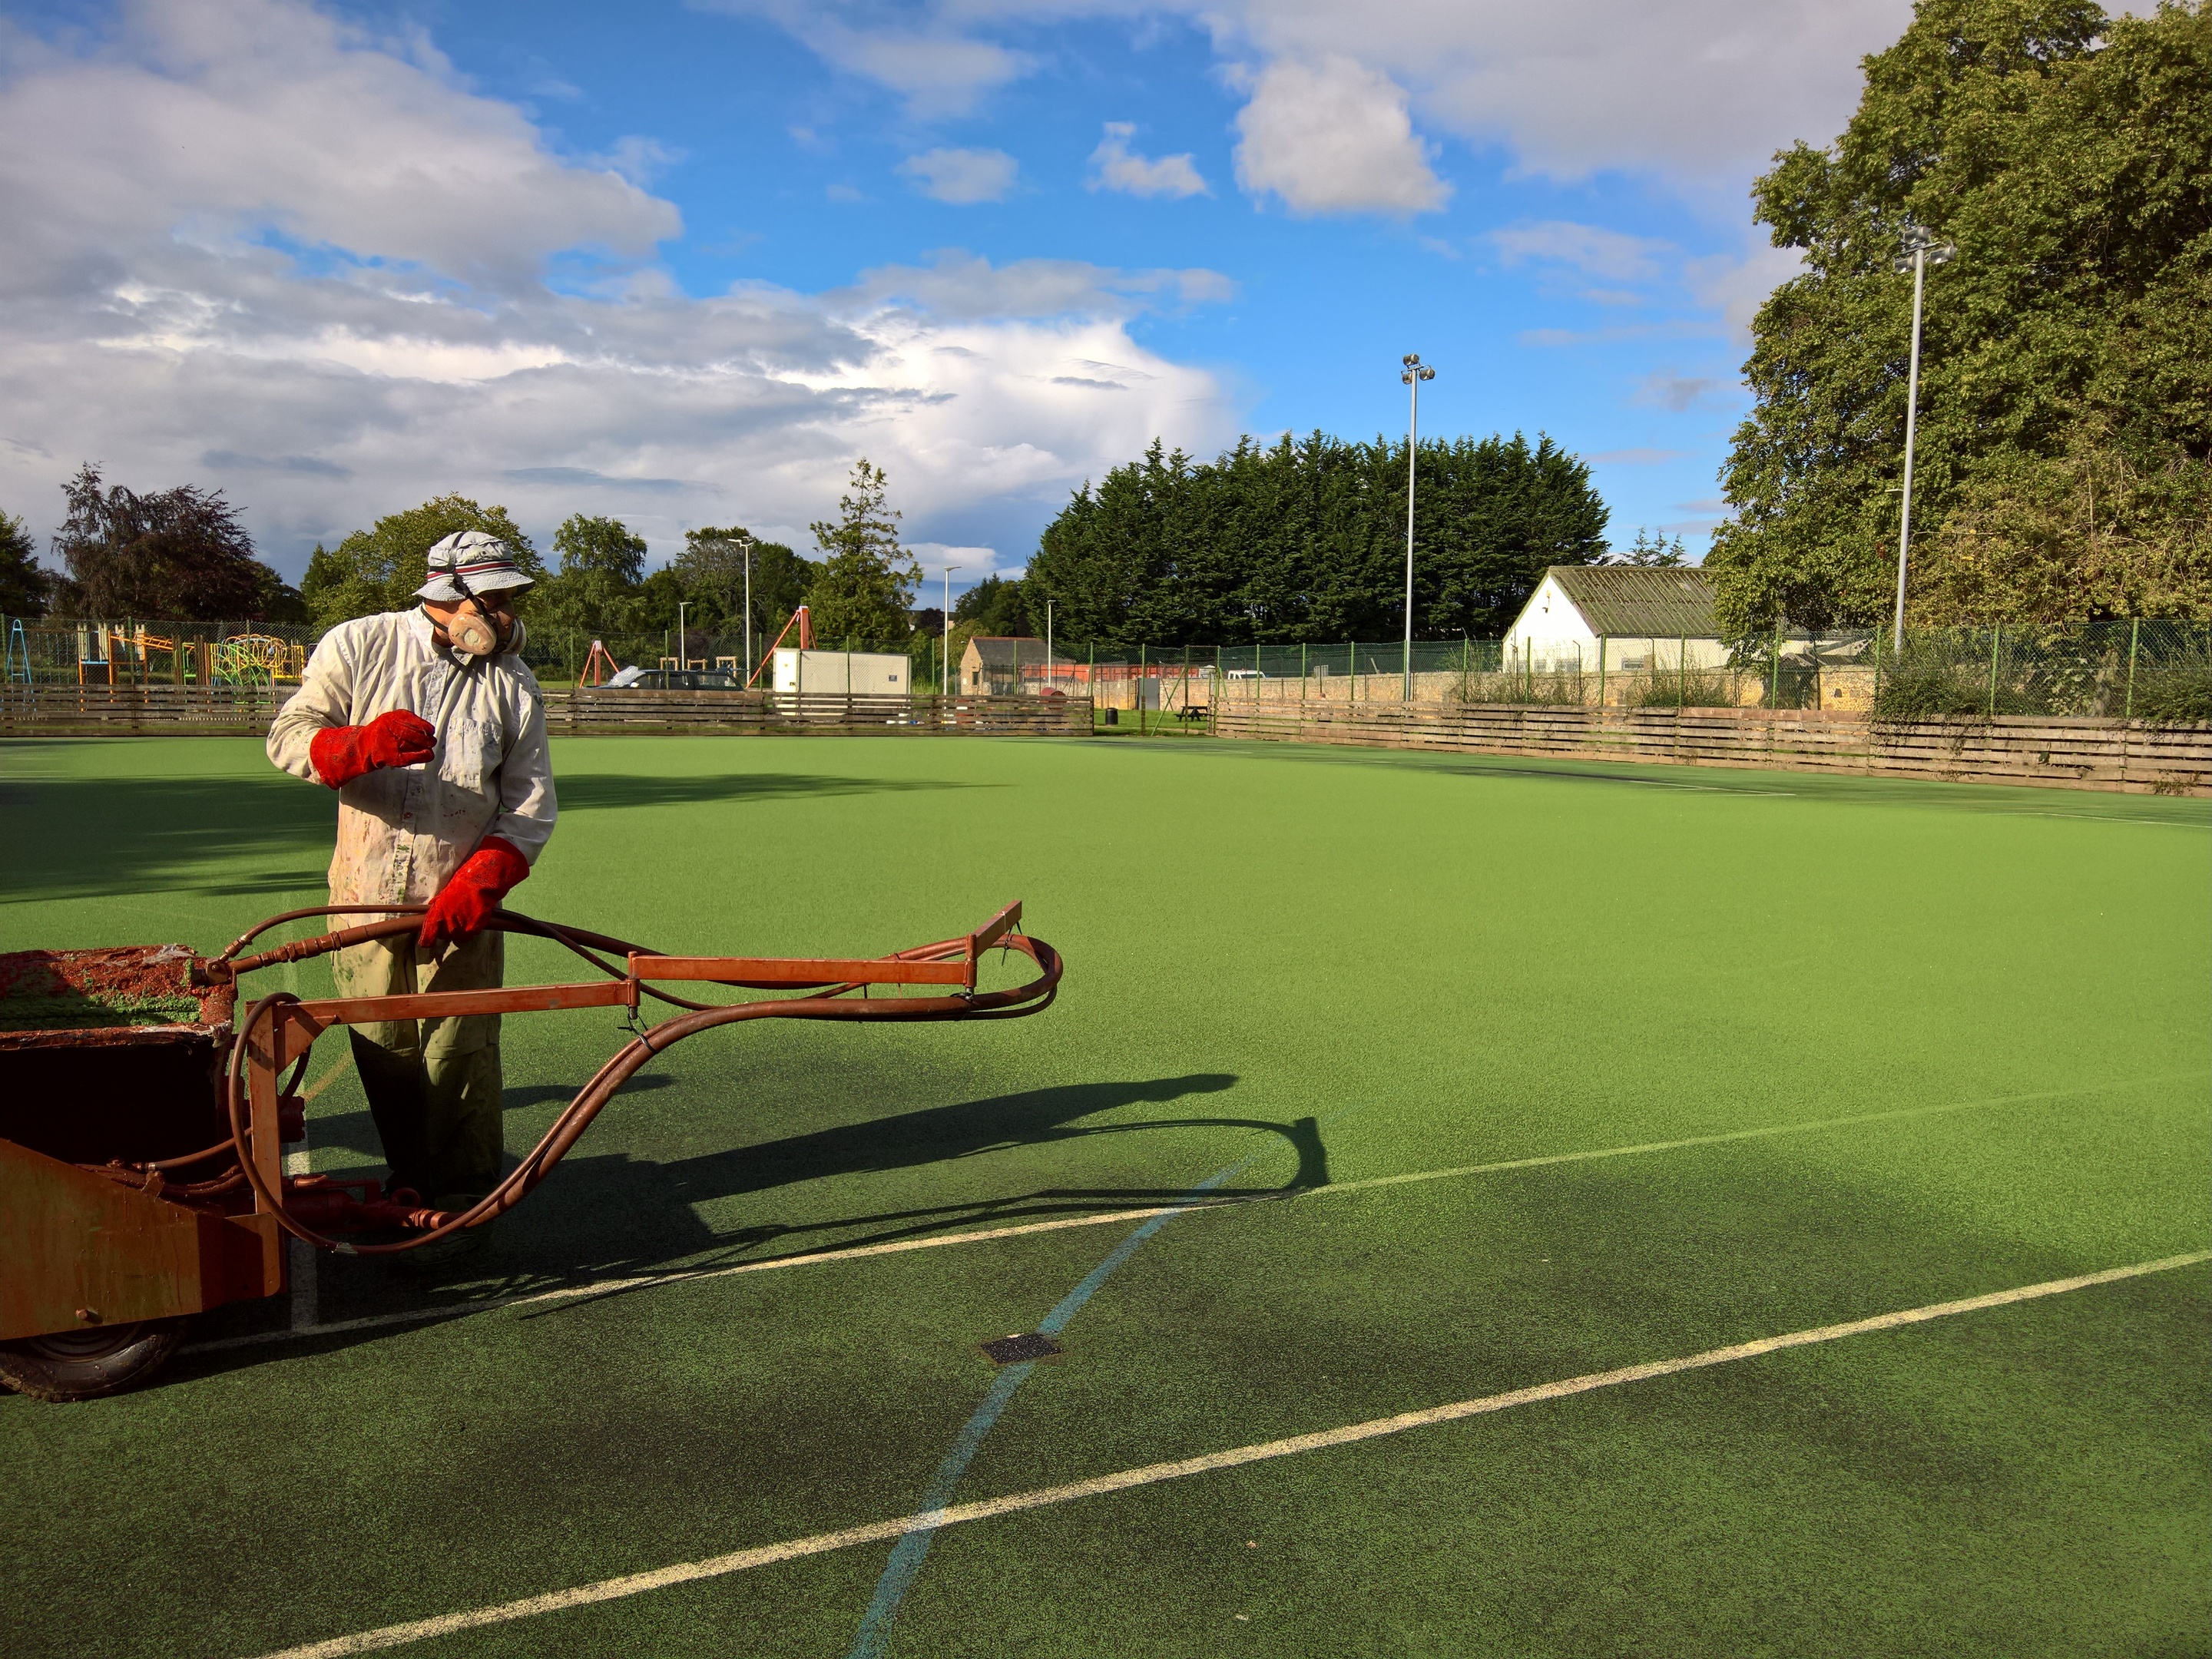 The courts at Cooper Park now have an all-weather surface.